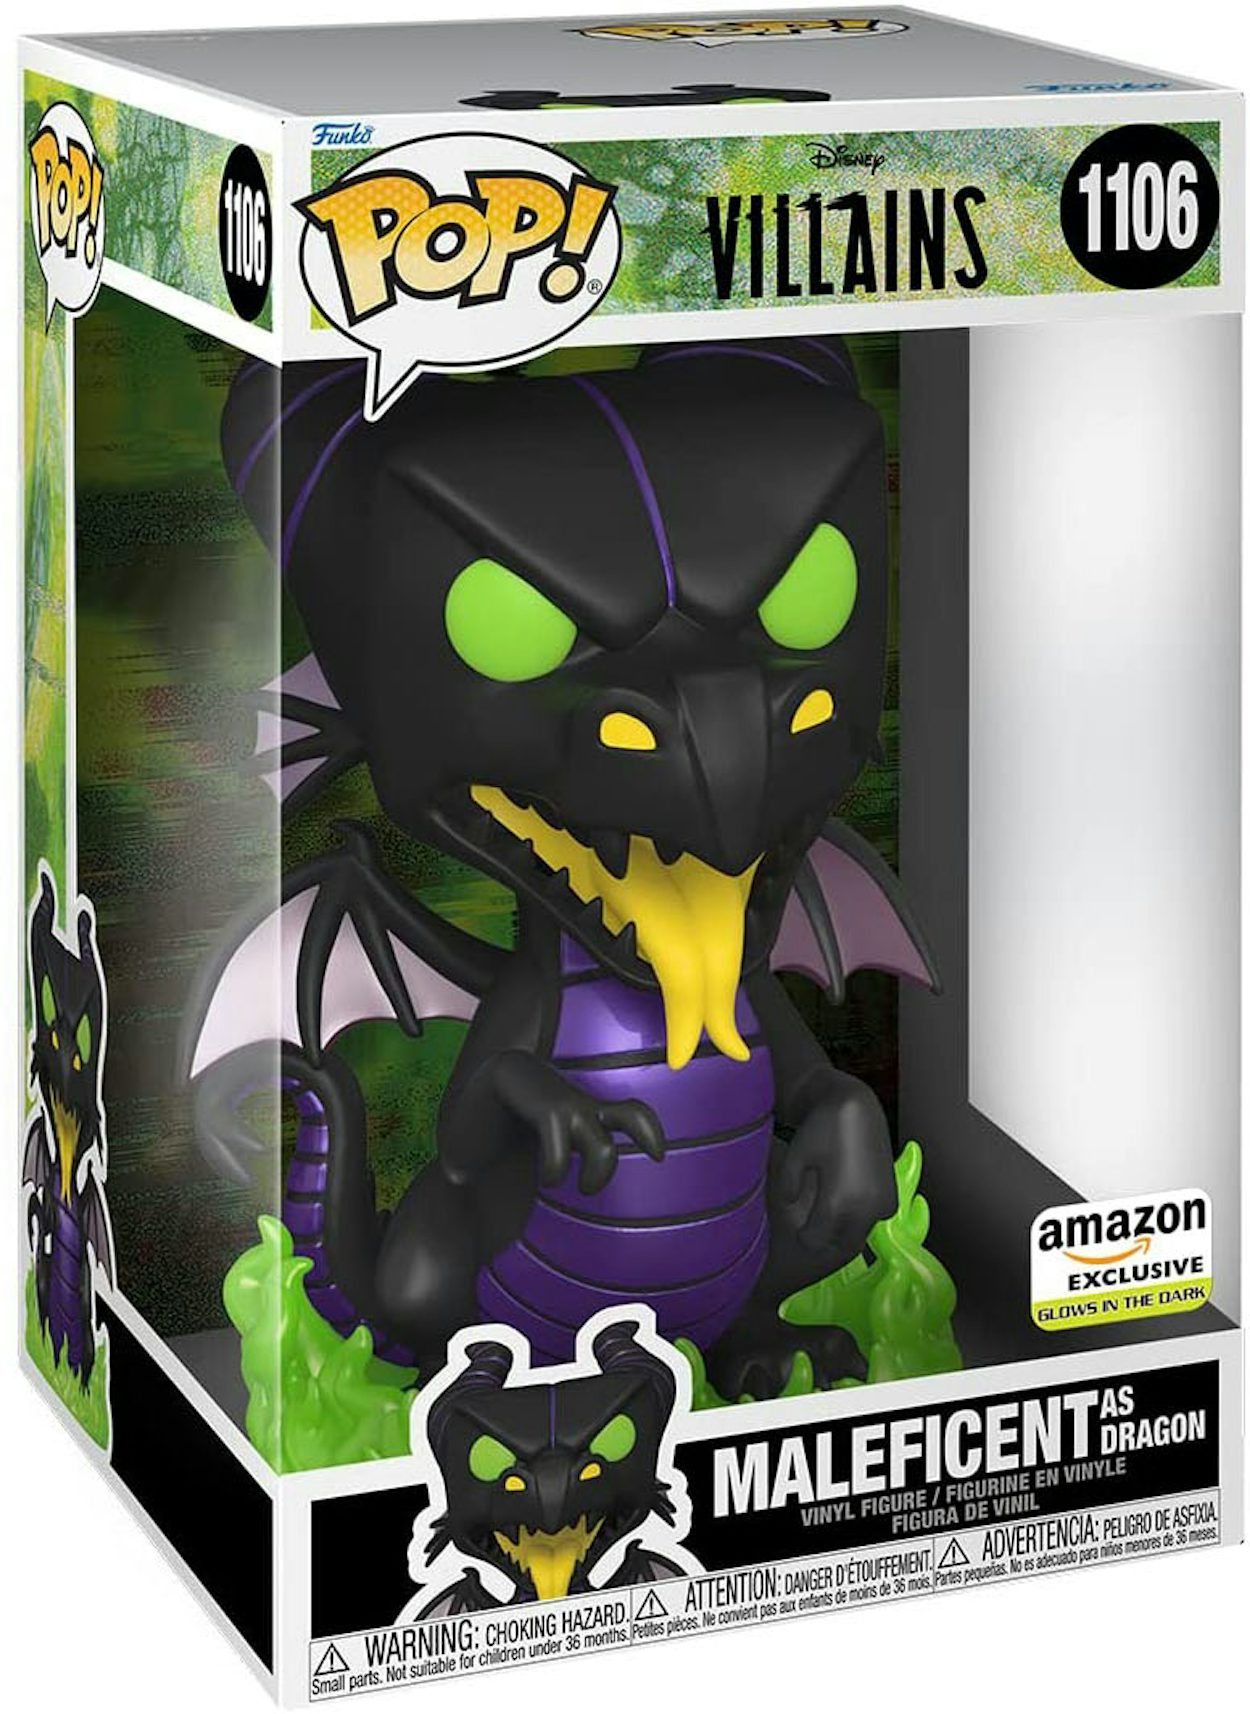 Exclusive Loungefly Maleficent Dragon with Glow in the Dark